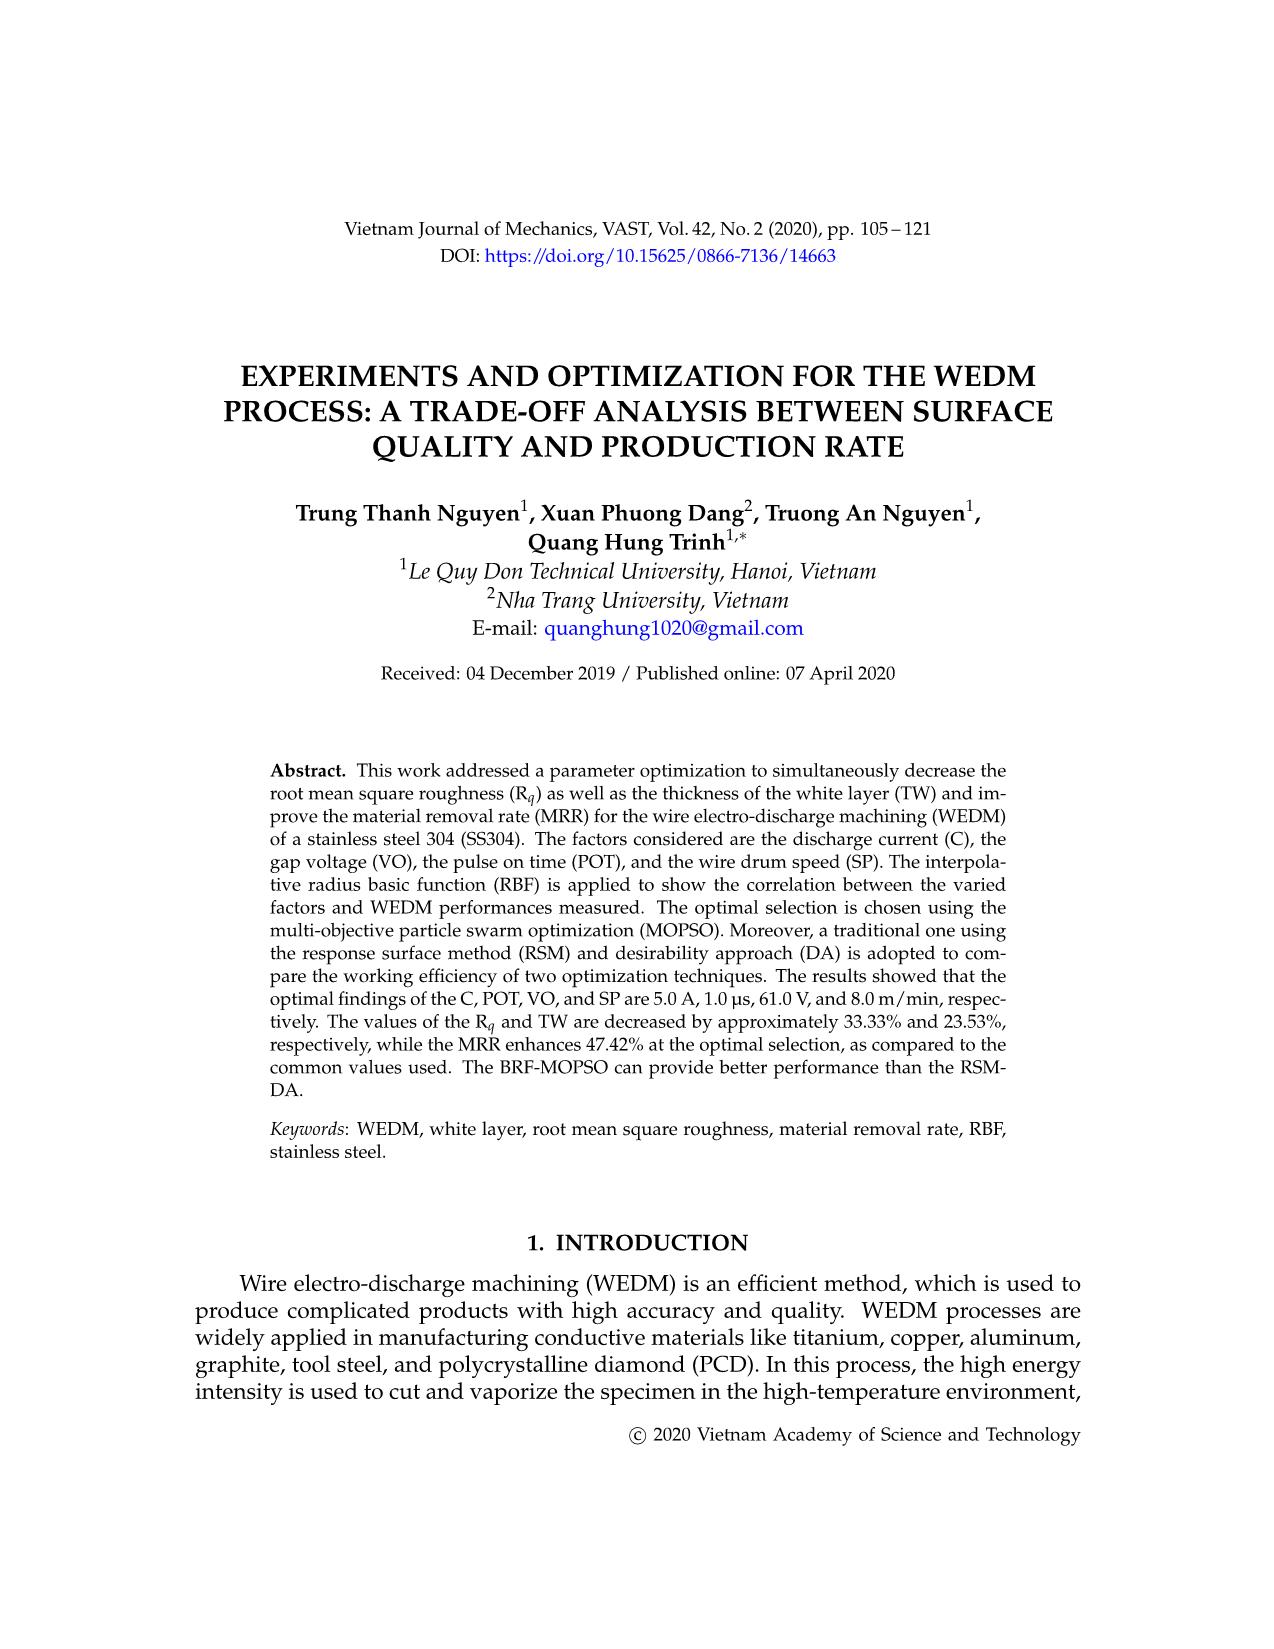 Experiments and optimization for the wedm process: A trade-off analysis between surface quality and production rate trang 1